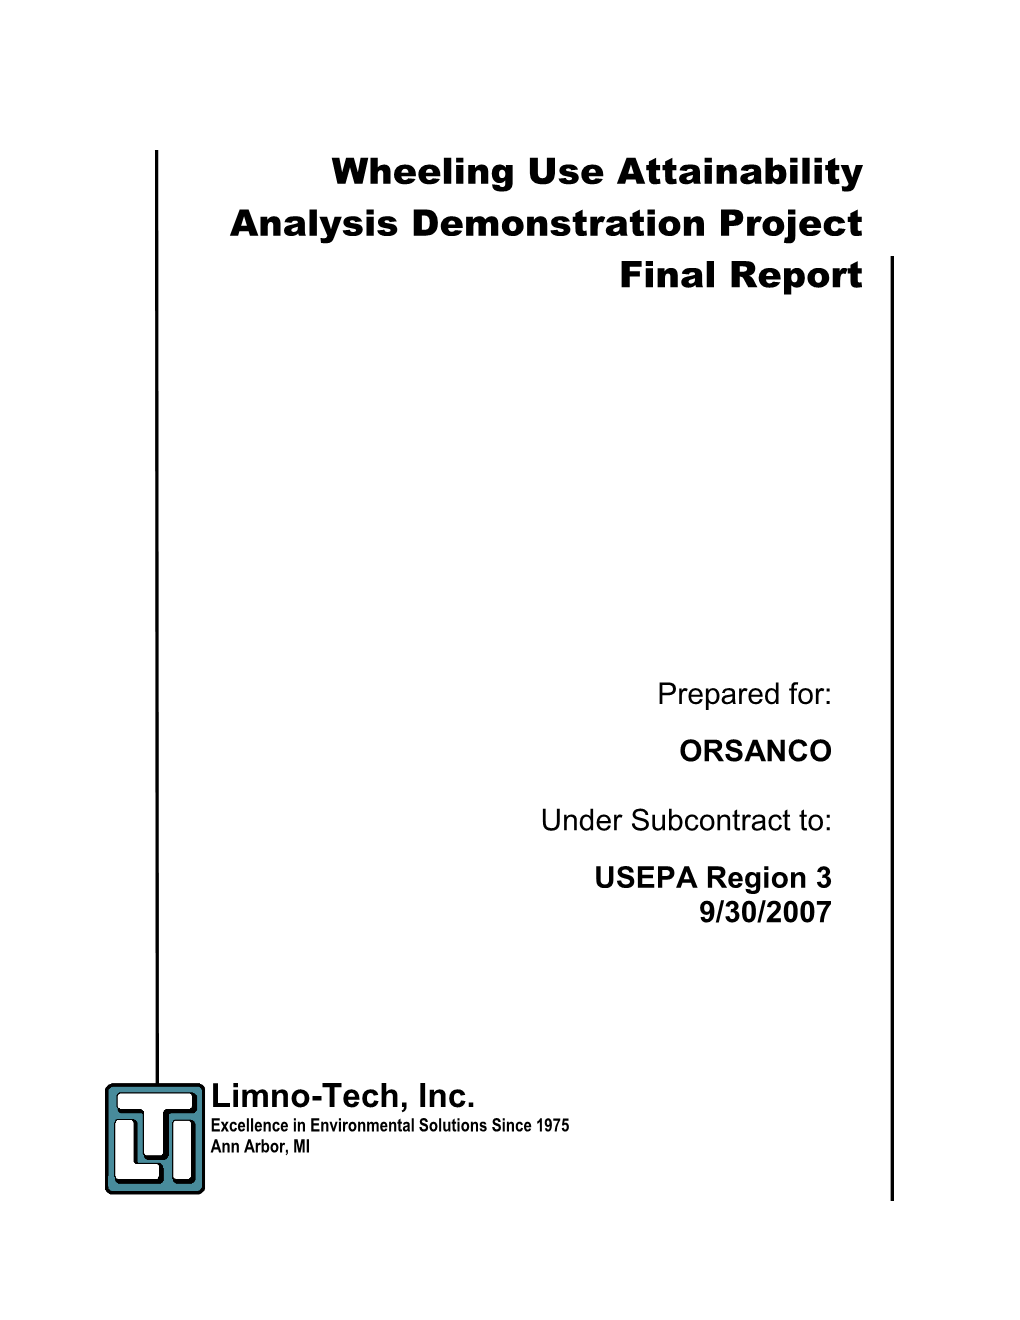 Wheeling Use Attainability Analysis Demonstration Project Final Report